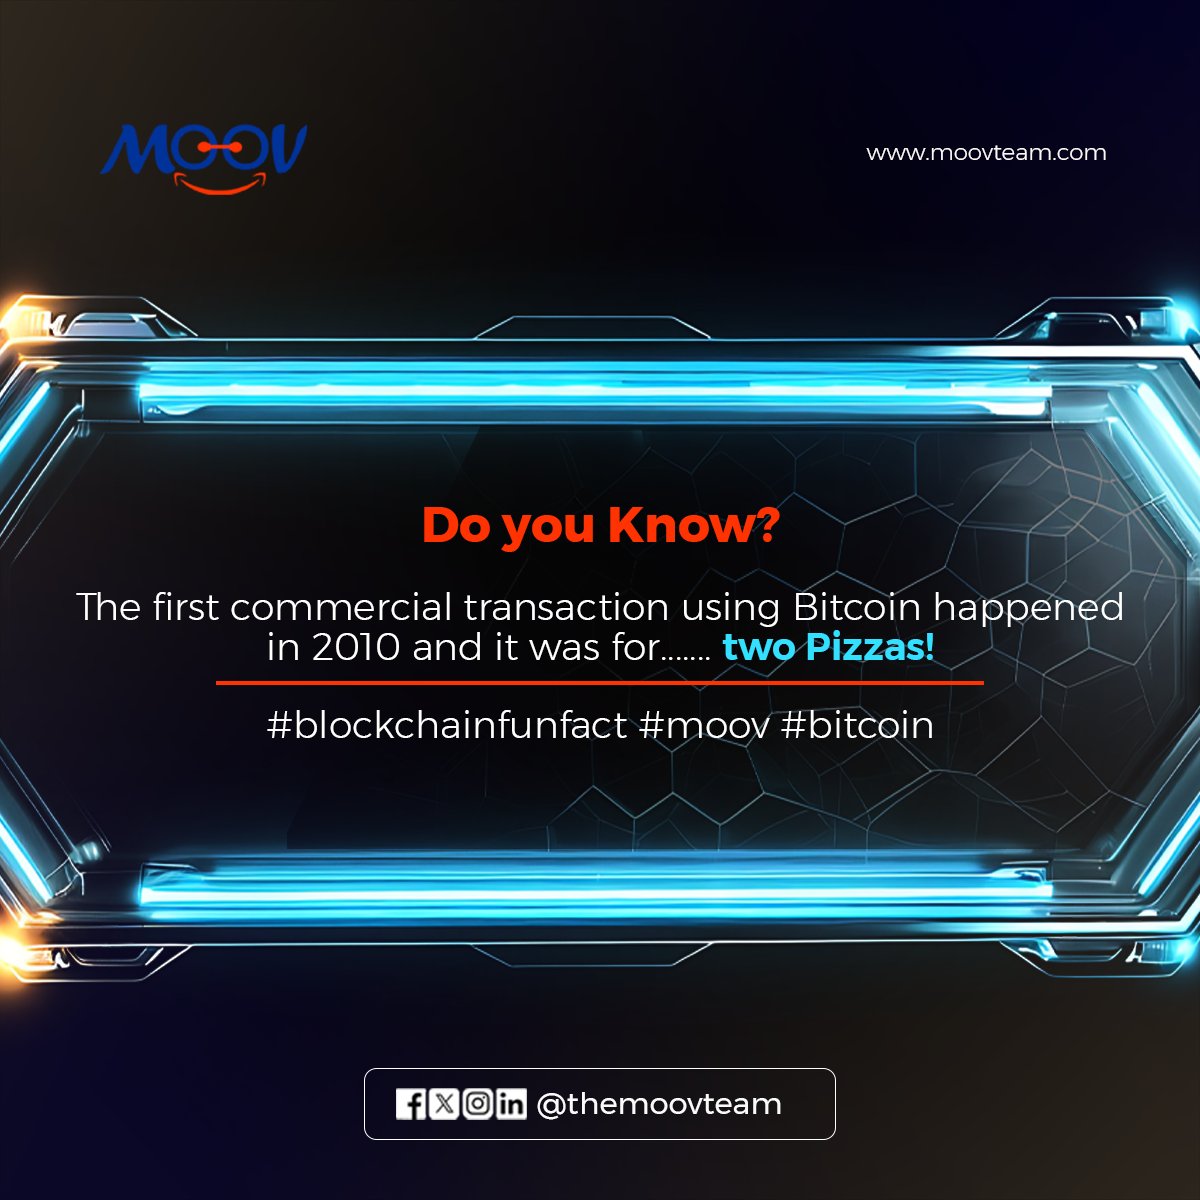 In Blockchain, nothing is recorded until a transaction is made.

How well did you know about this? Let's hear your POV!

#Blockchain #Web3 #BlockchainMarketing #BlockchainEducation #IanxSB19xTerry #الهلال_التعاون #الاتحاد_ابها #LISA #bobrisky